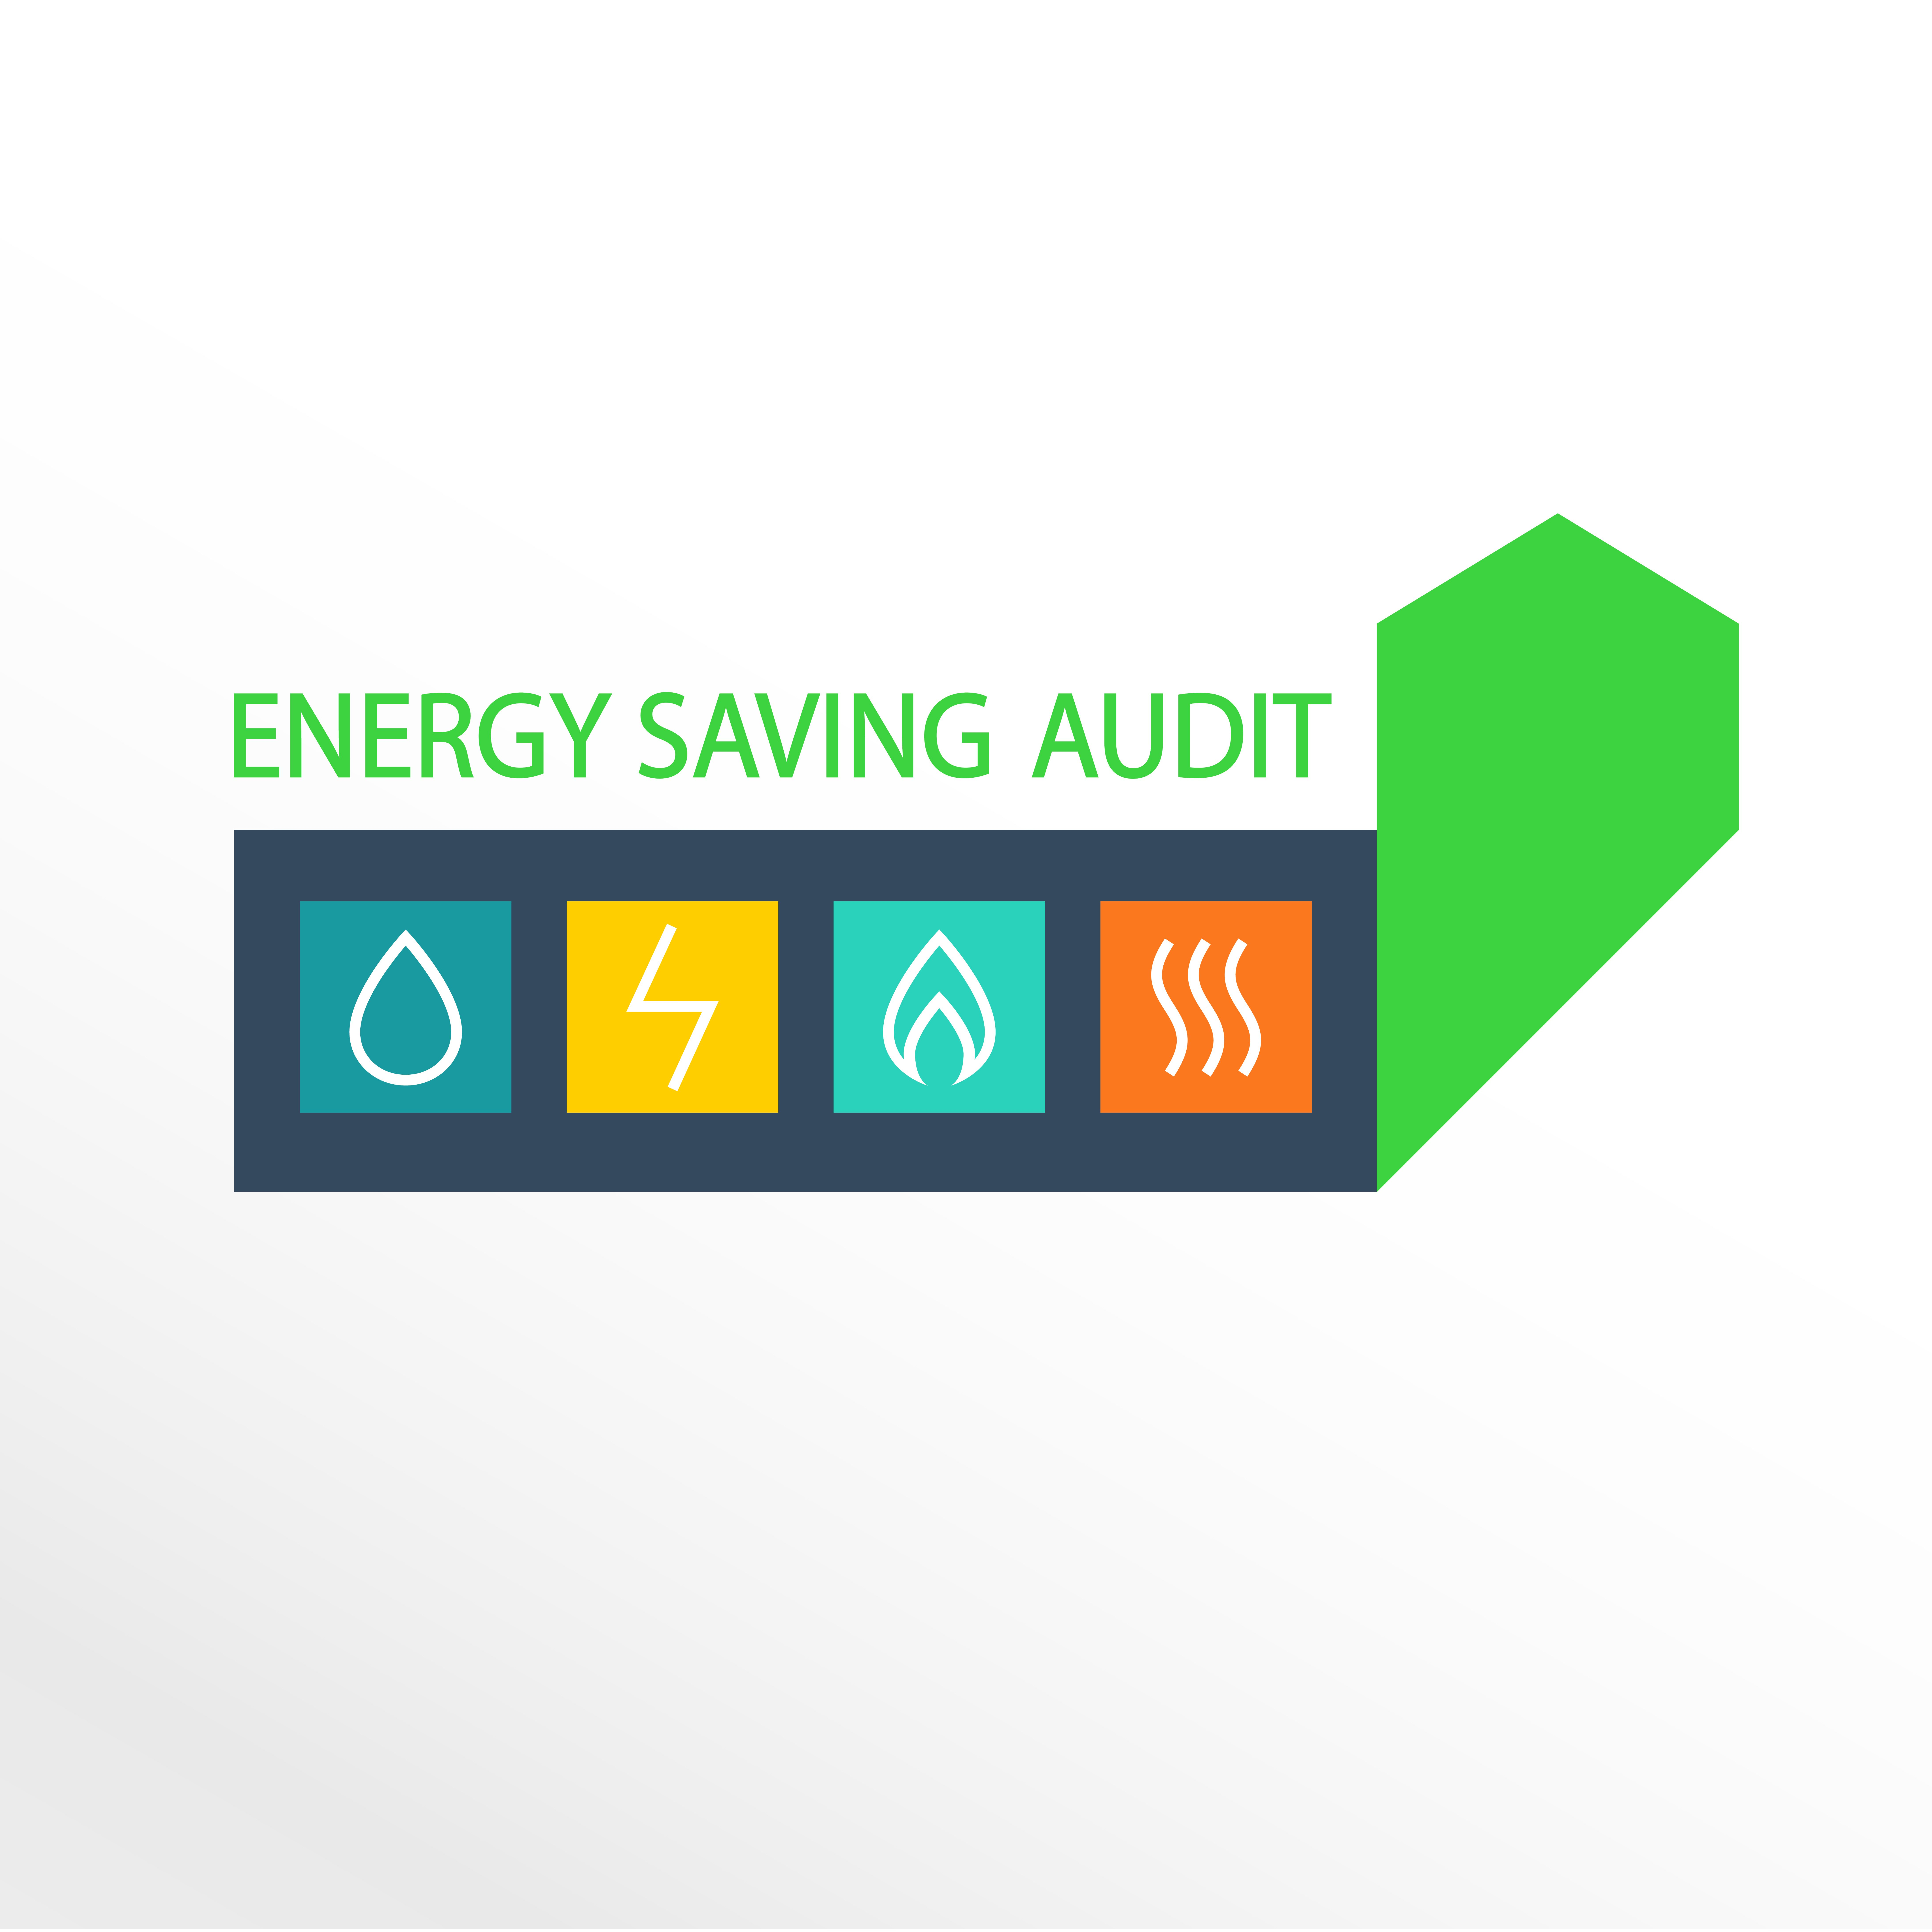 Energy Audits - Benefits and Overcoming Challenges